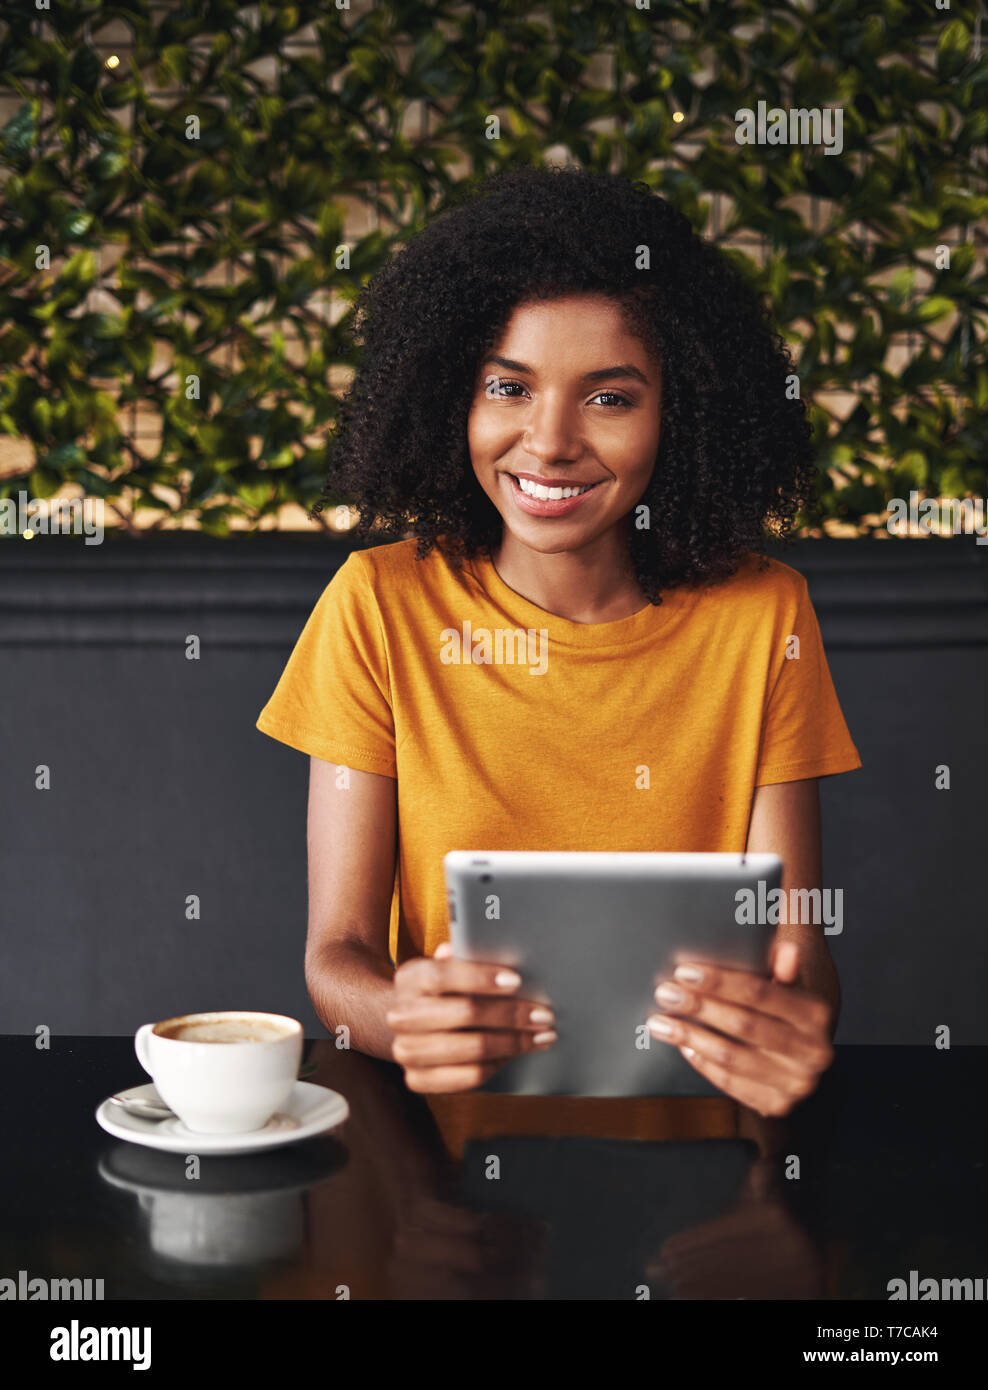 Smiling young woman holding digital tablet in hand Banque D'Images